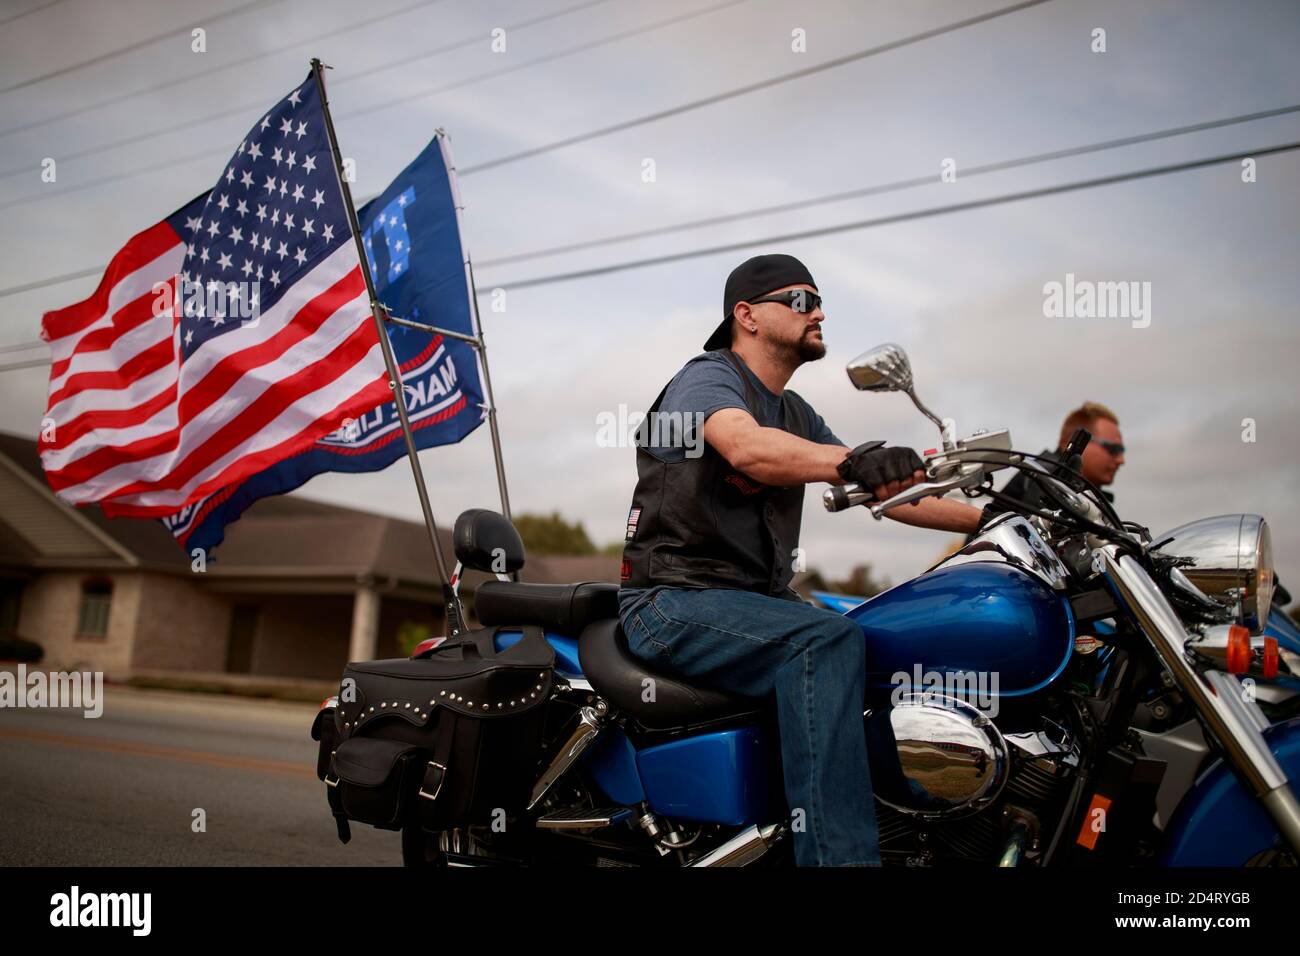 Martinsville, United States. 10th Oct, 2020. Trump supporters riding a  motorcycle participate in a Donald J. Trump parade.Trump is campaigning for  a second term as United States President while running against Democrat